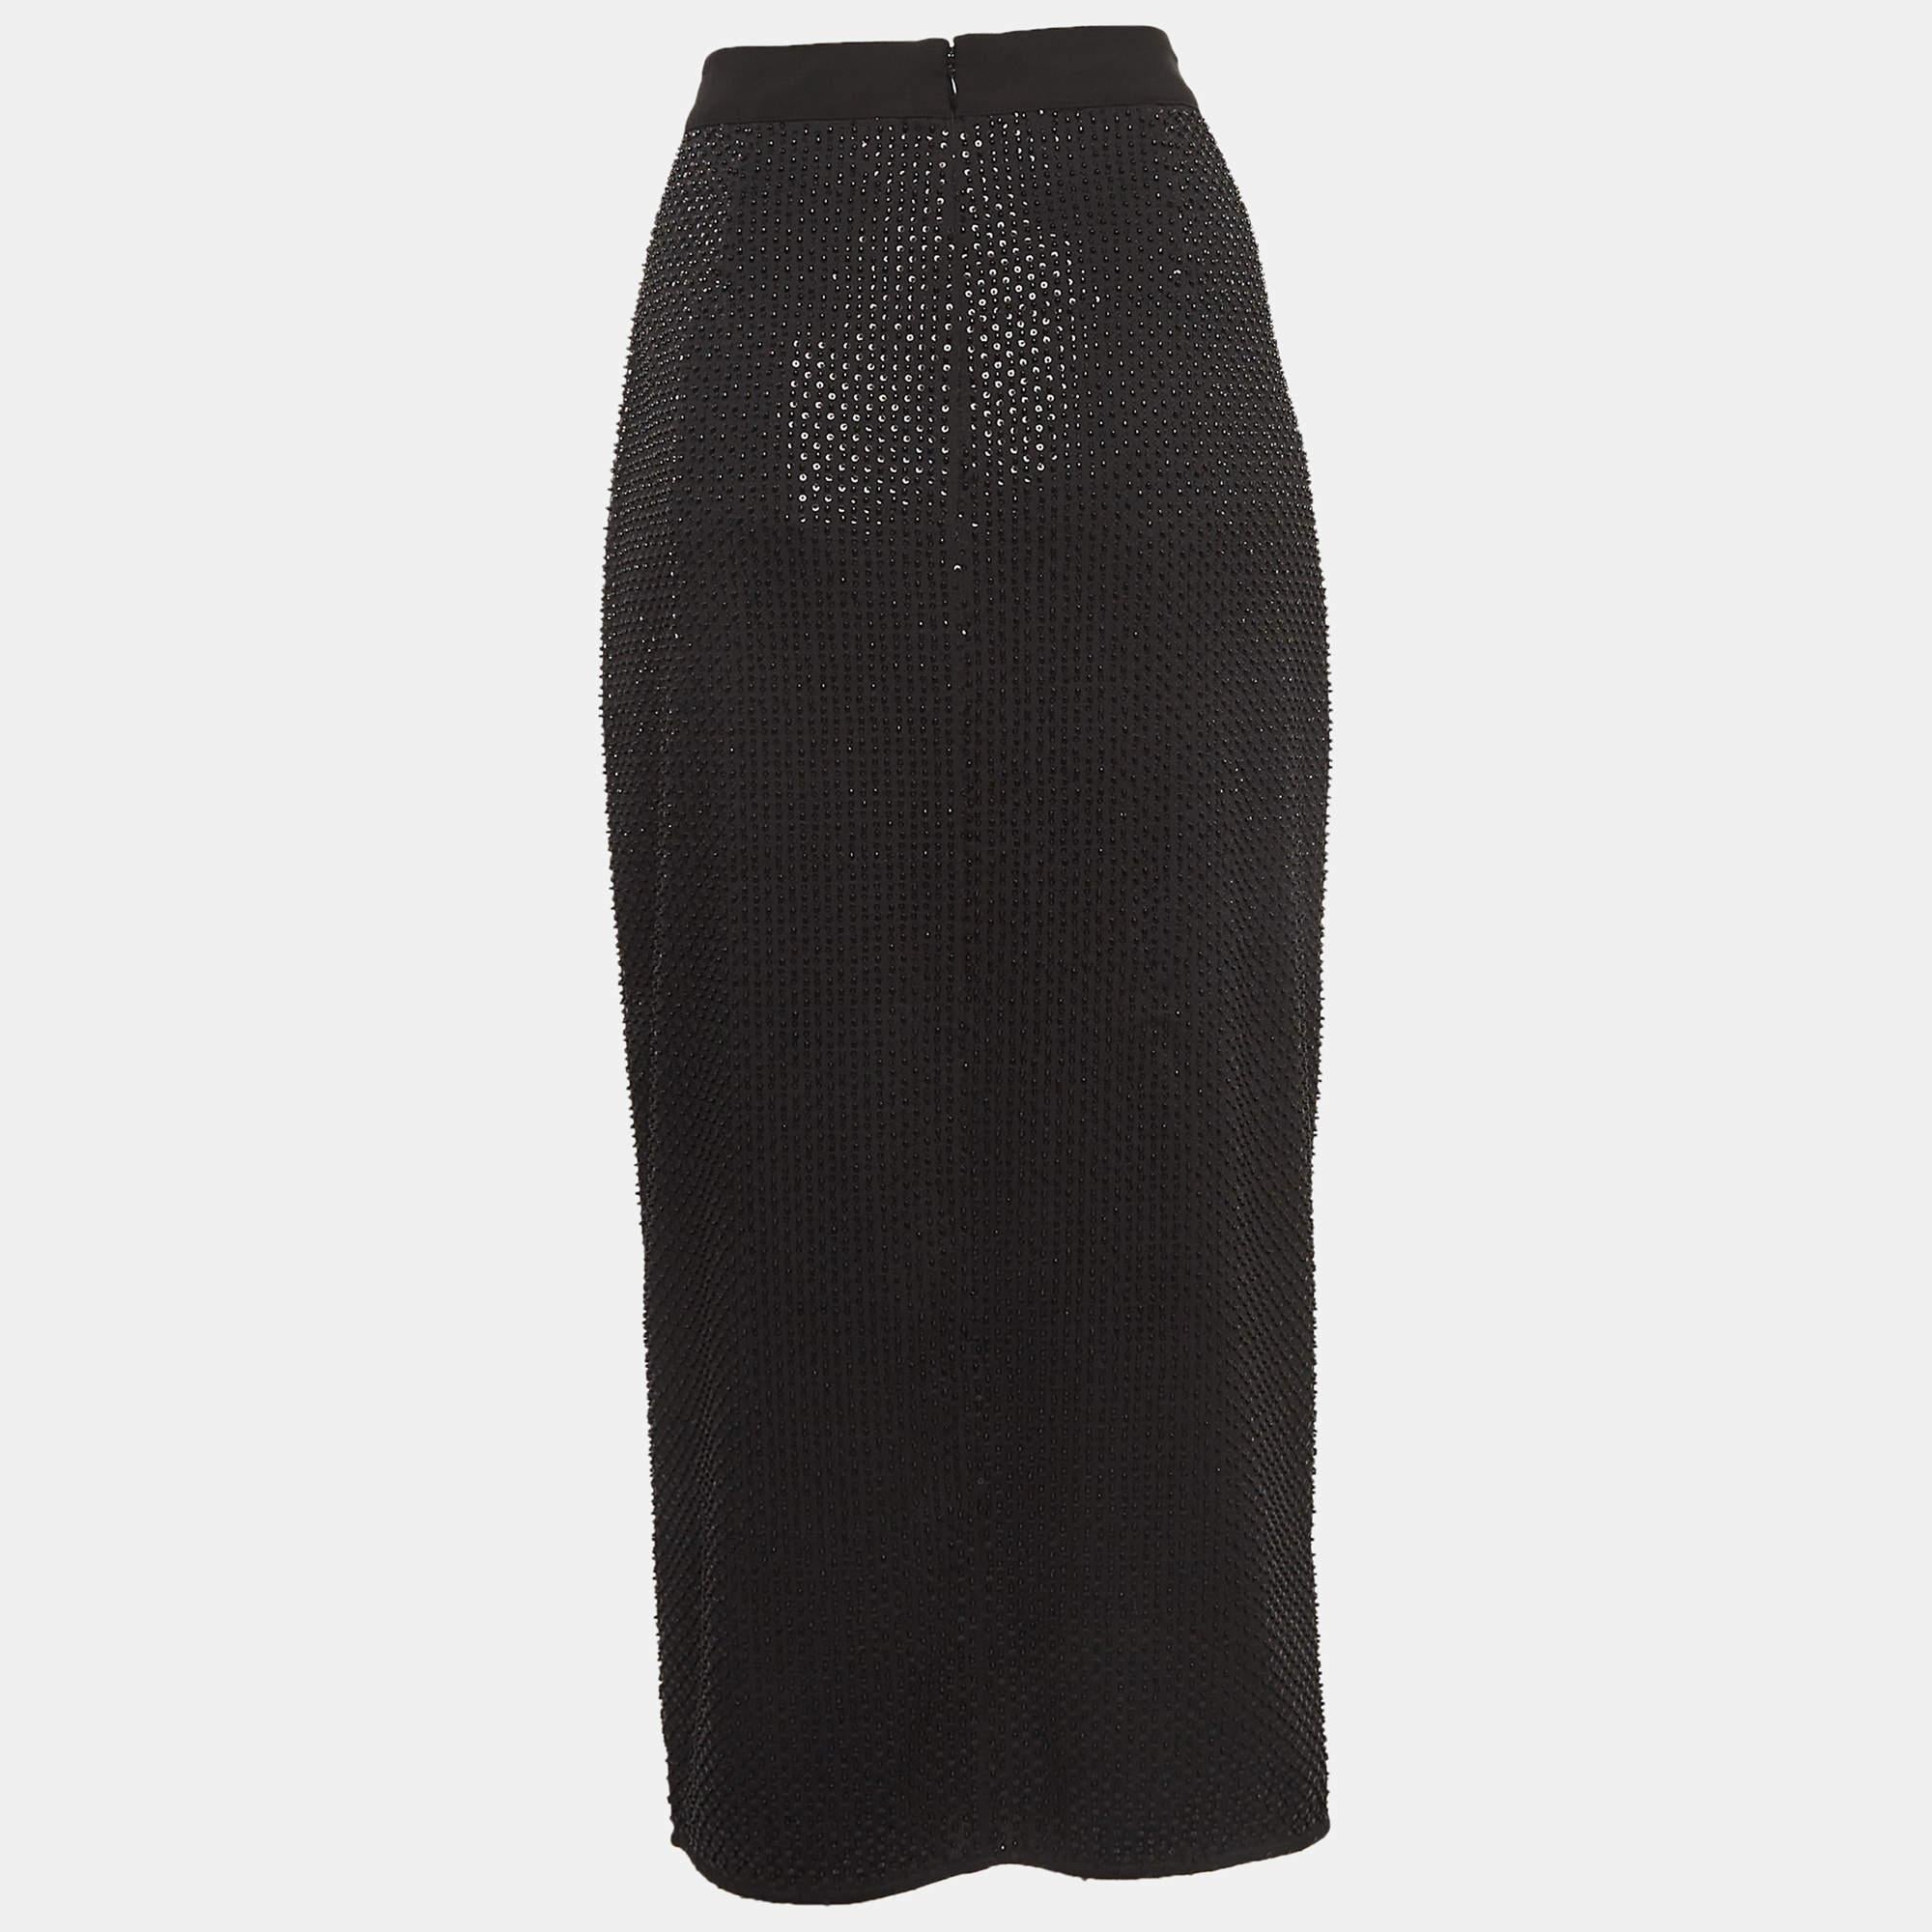 This elegant skirt is worth adding to your closet! Crafted from fine materials, it is exquisitely designed into a flattering shape.

Includes: brand tag

